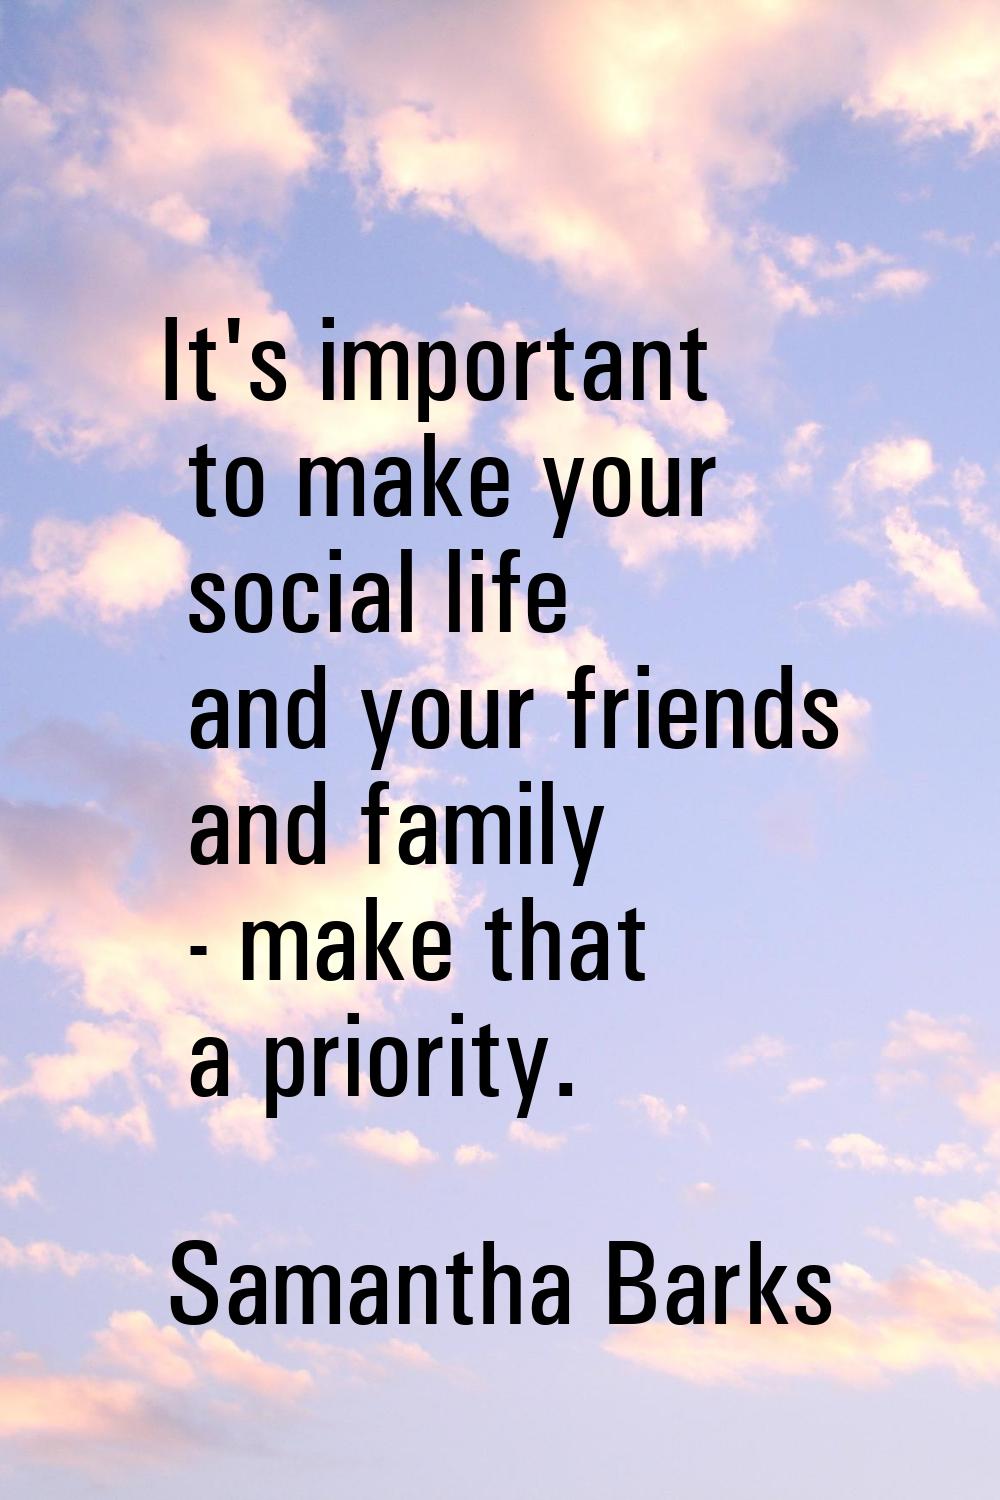 It's important to make your social life and your friends and family - make that a priority.